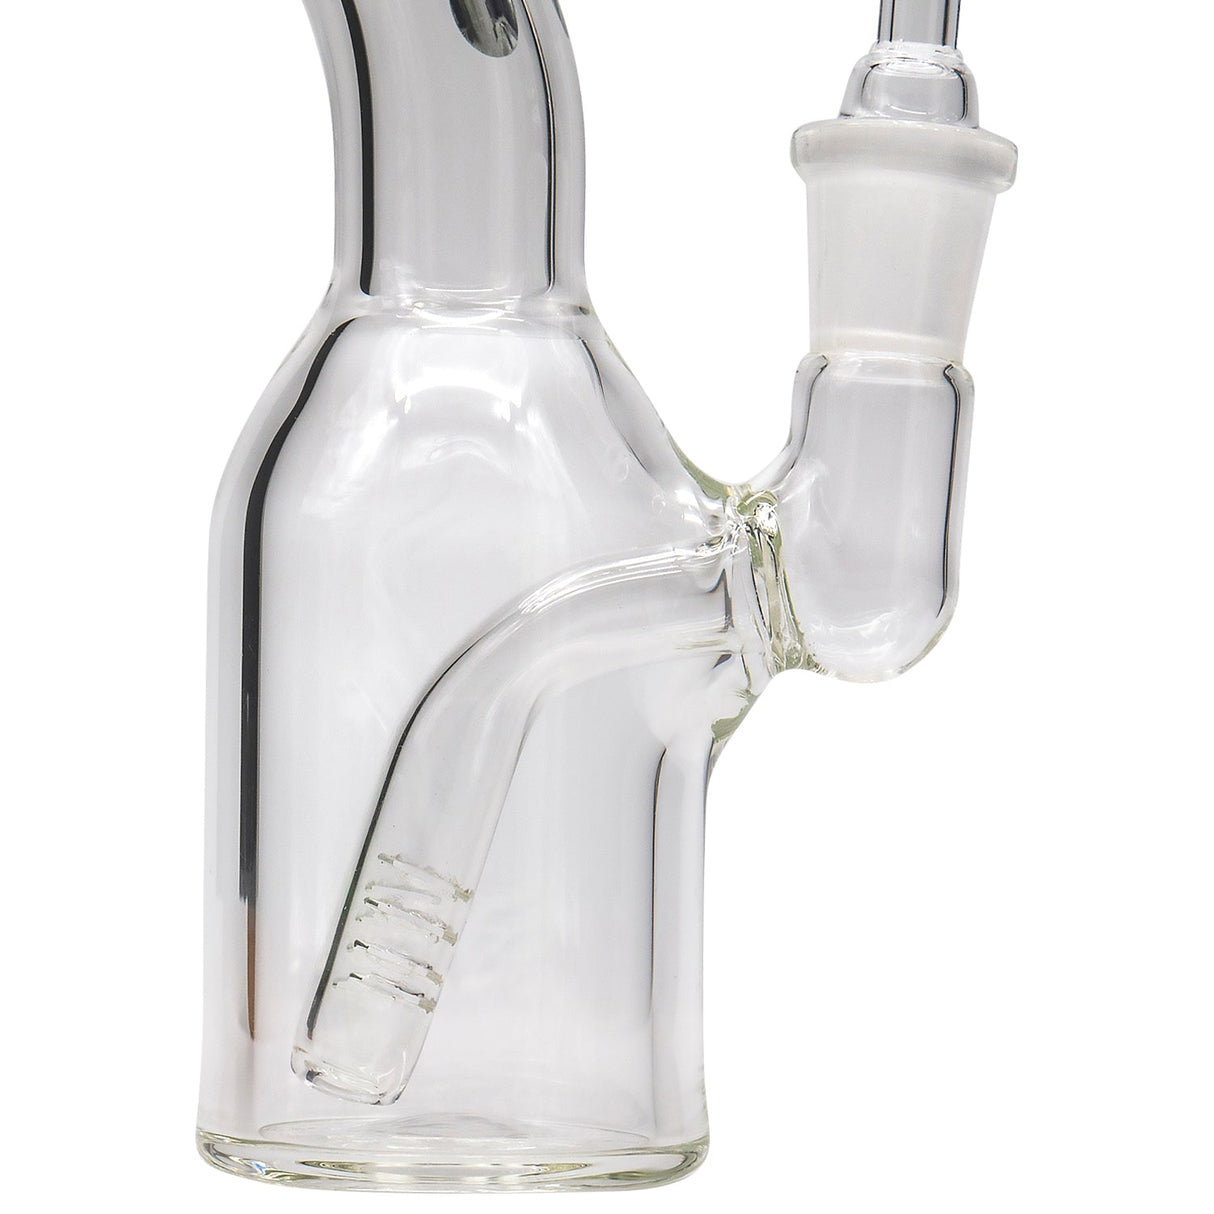 LA Pipes Compact Bent Neck Concentrate Waterpipe, 90 Degree Joint, Side View